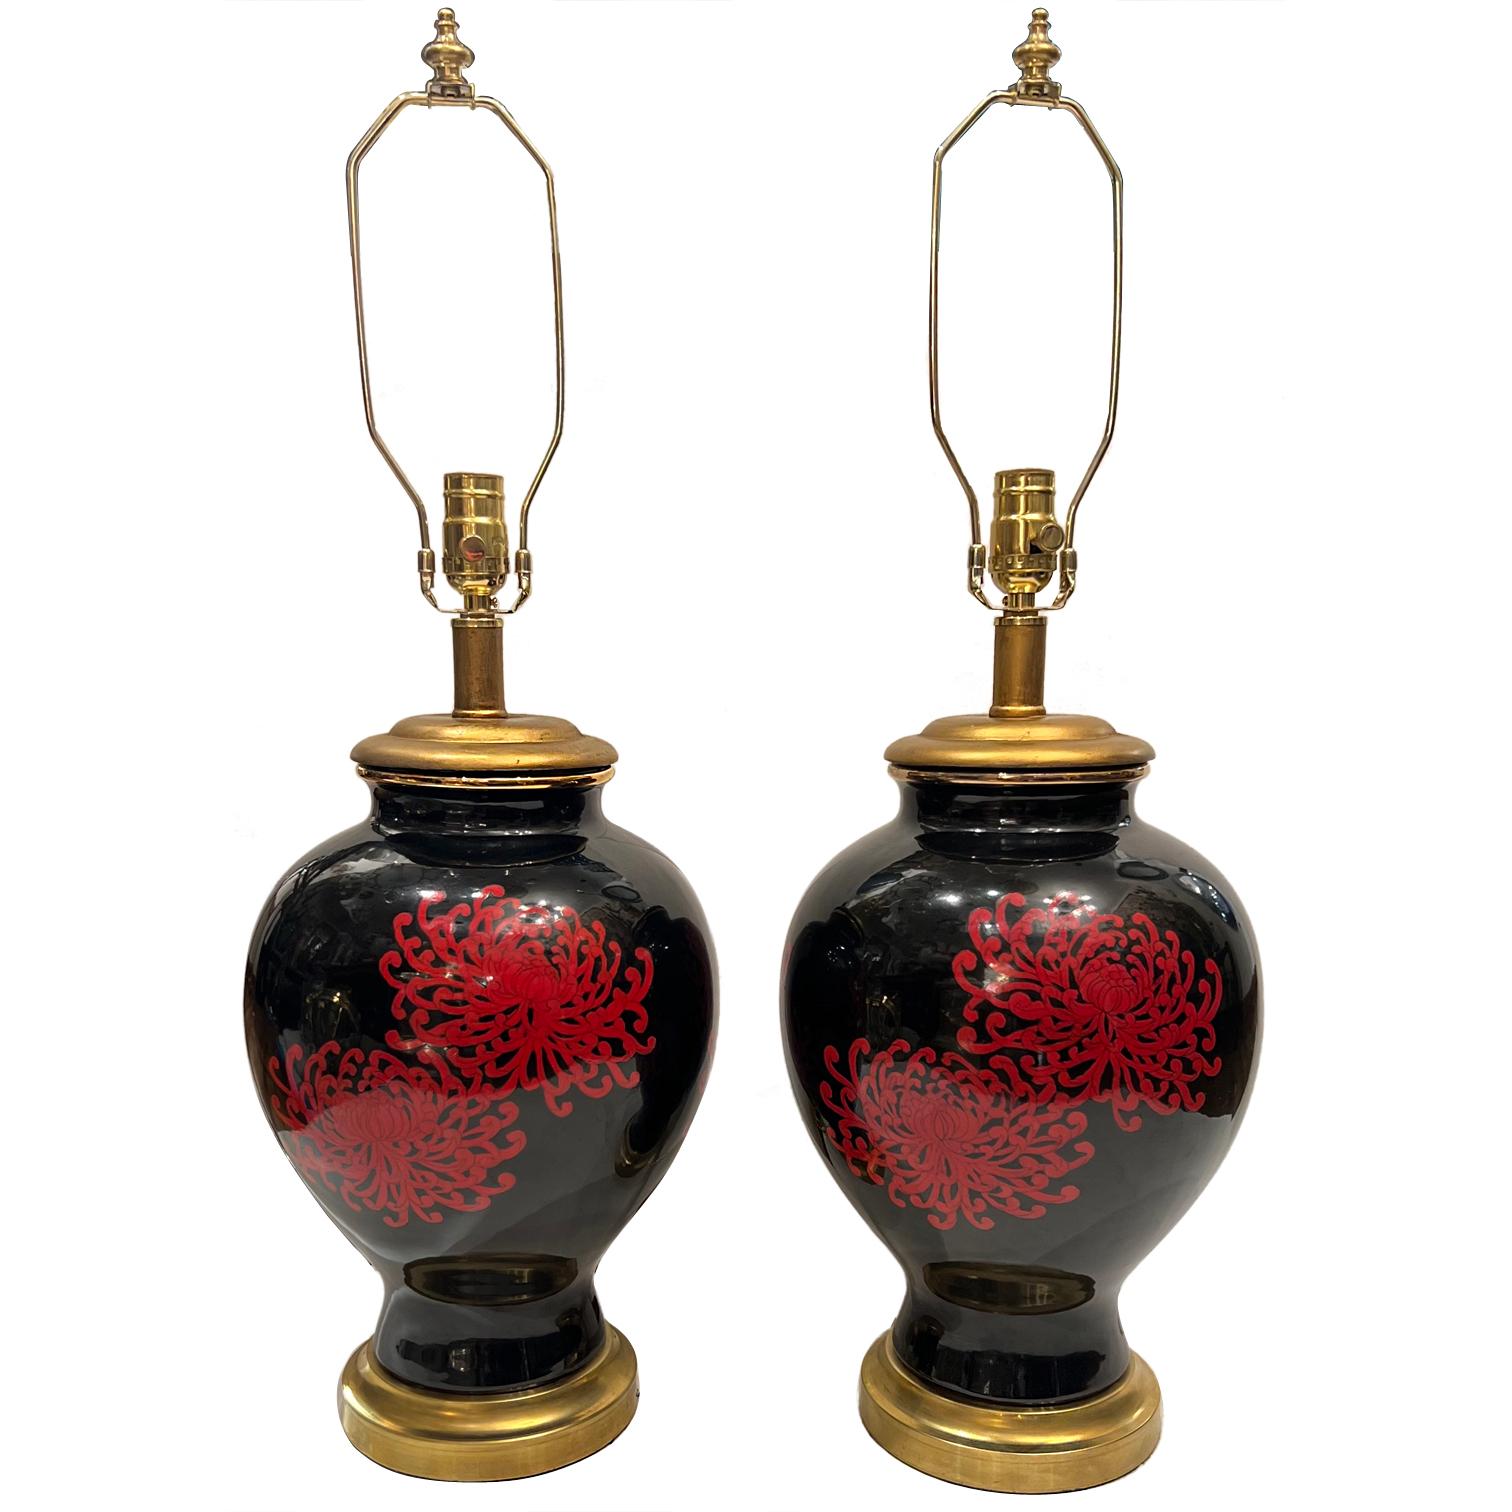 Pair of 1950's French lamps with Chrysanthemum flowers on a black background.

Measurements:
Height of body: 17.75